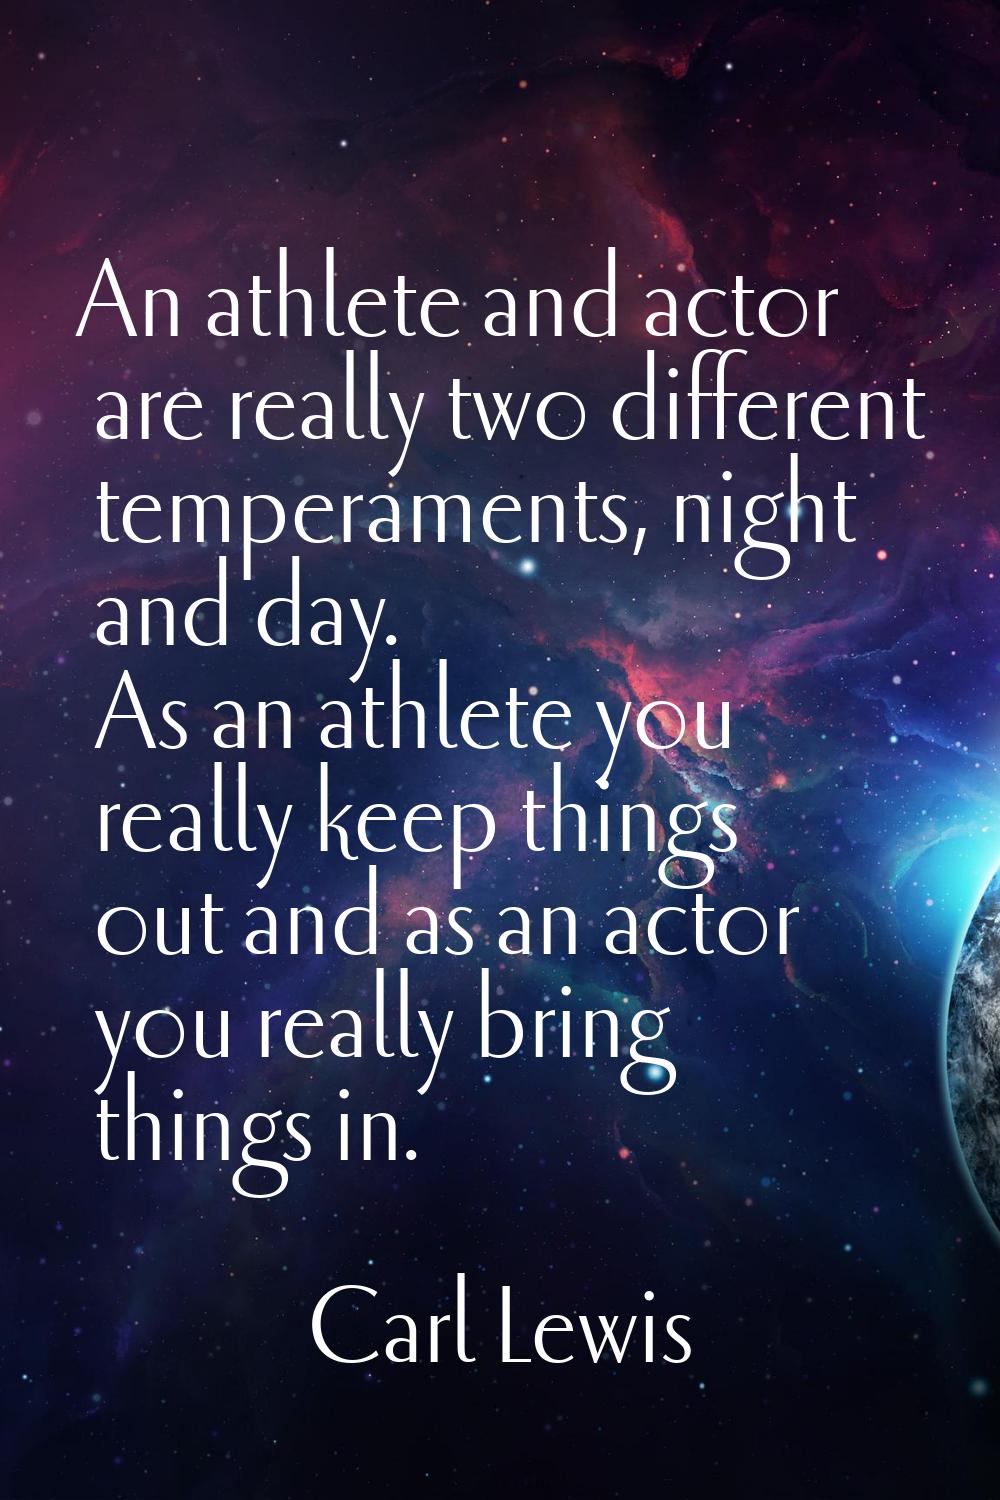 An athlete and actor are really two different temperaments, night and day. As an athlete you really